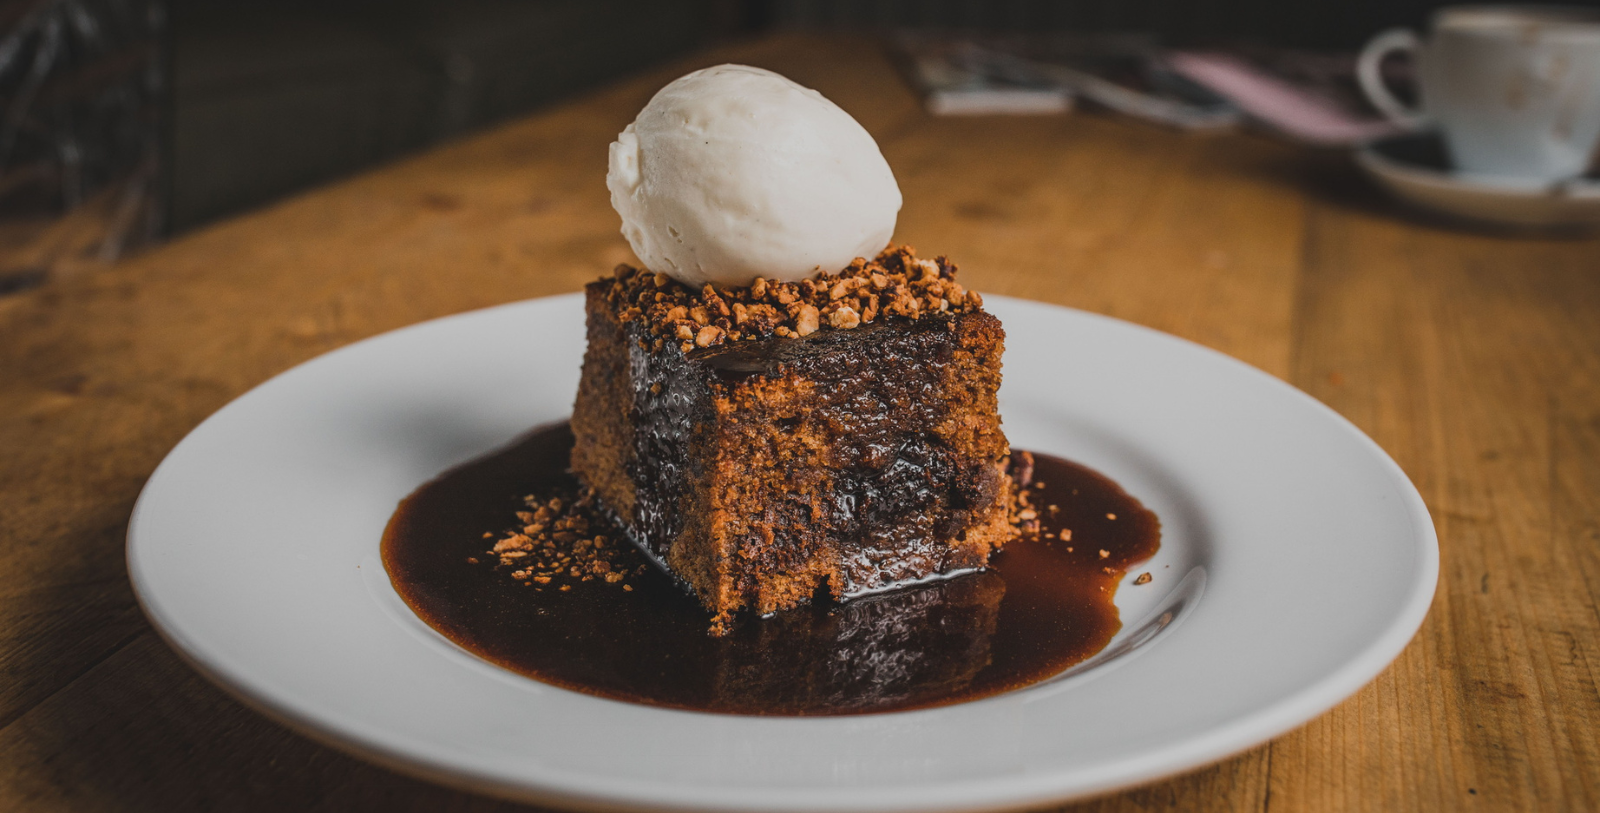 Taste the Sticky Toffee Pudding, an English dessert invented in the local area of Cumbria and served in the Castle’s restaurant.